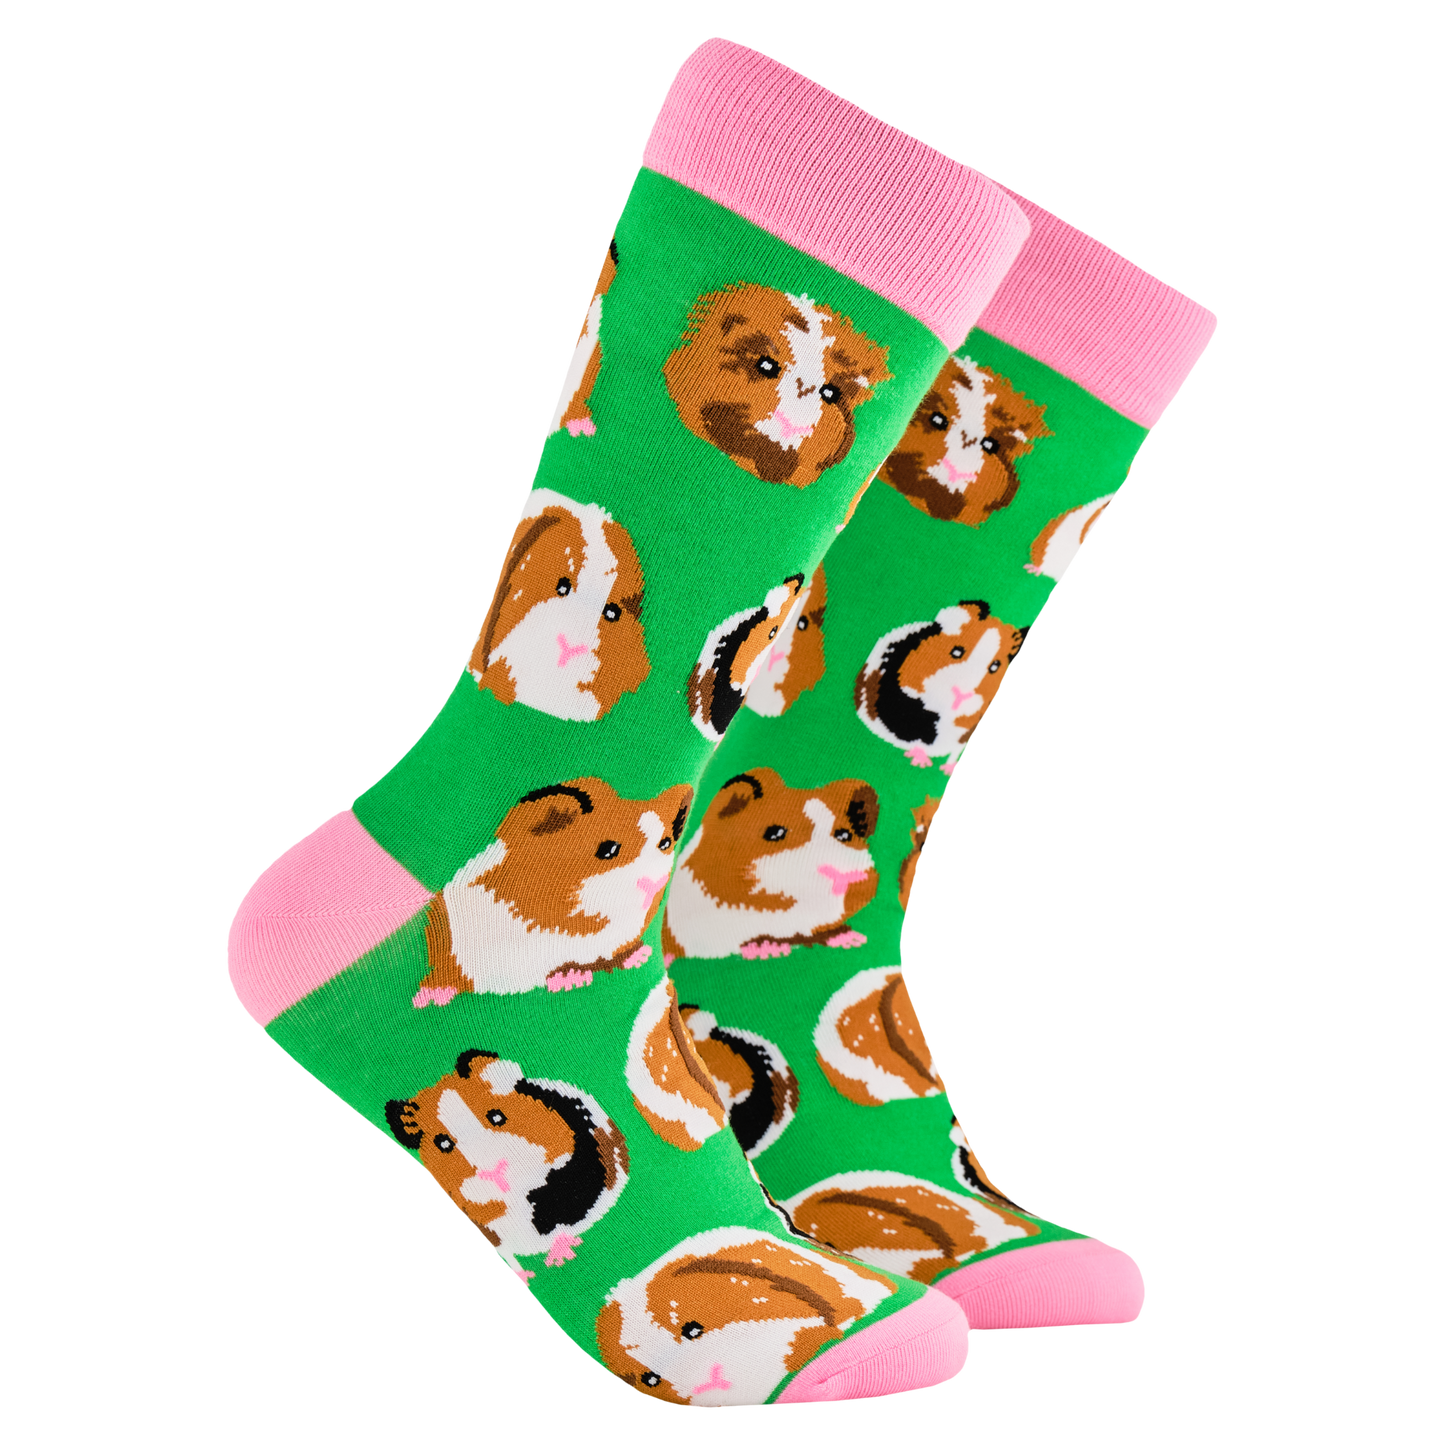 Guinea Pig Socks - I Am Not A Hamster. A pair of socks depicting guinea pigs. Green legs, pink cuff, heel and toe. 